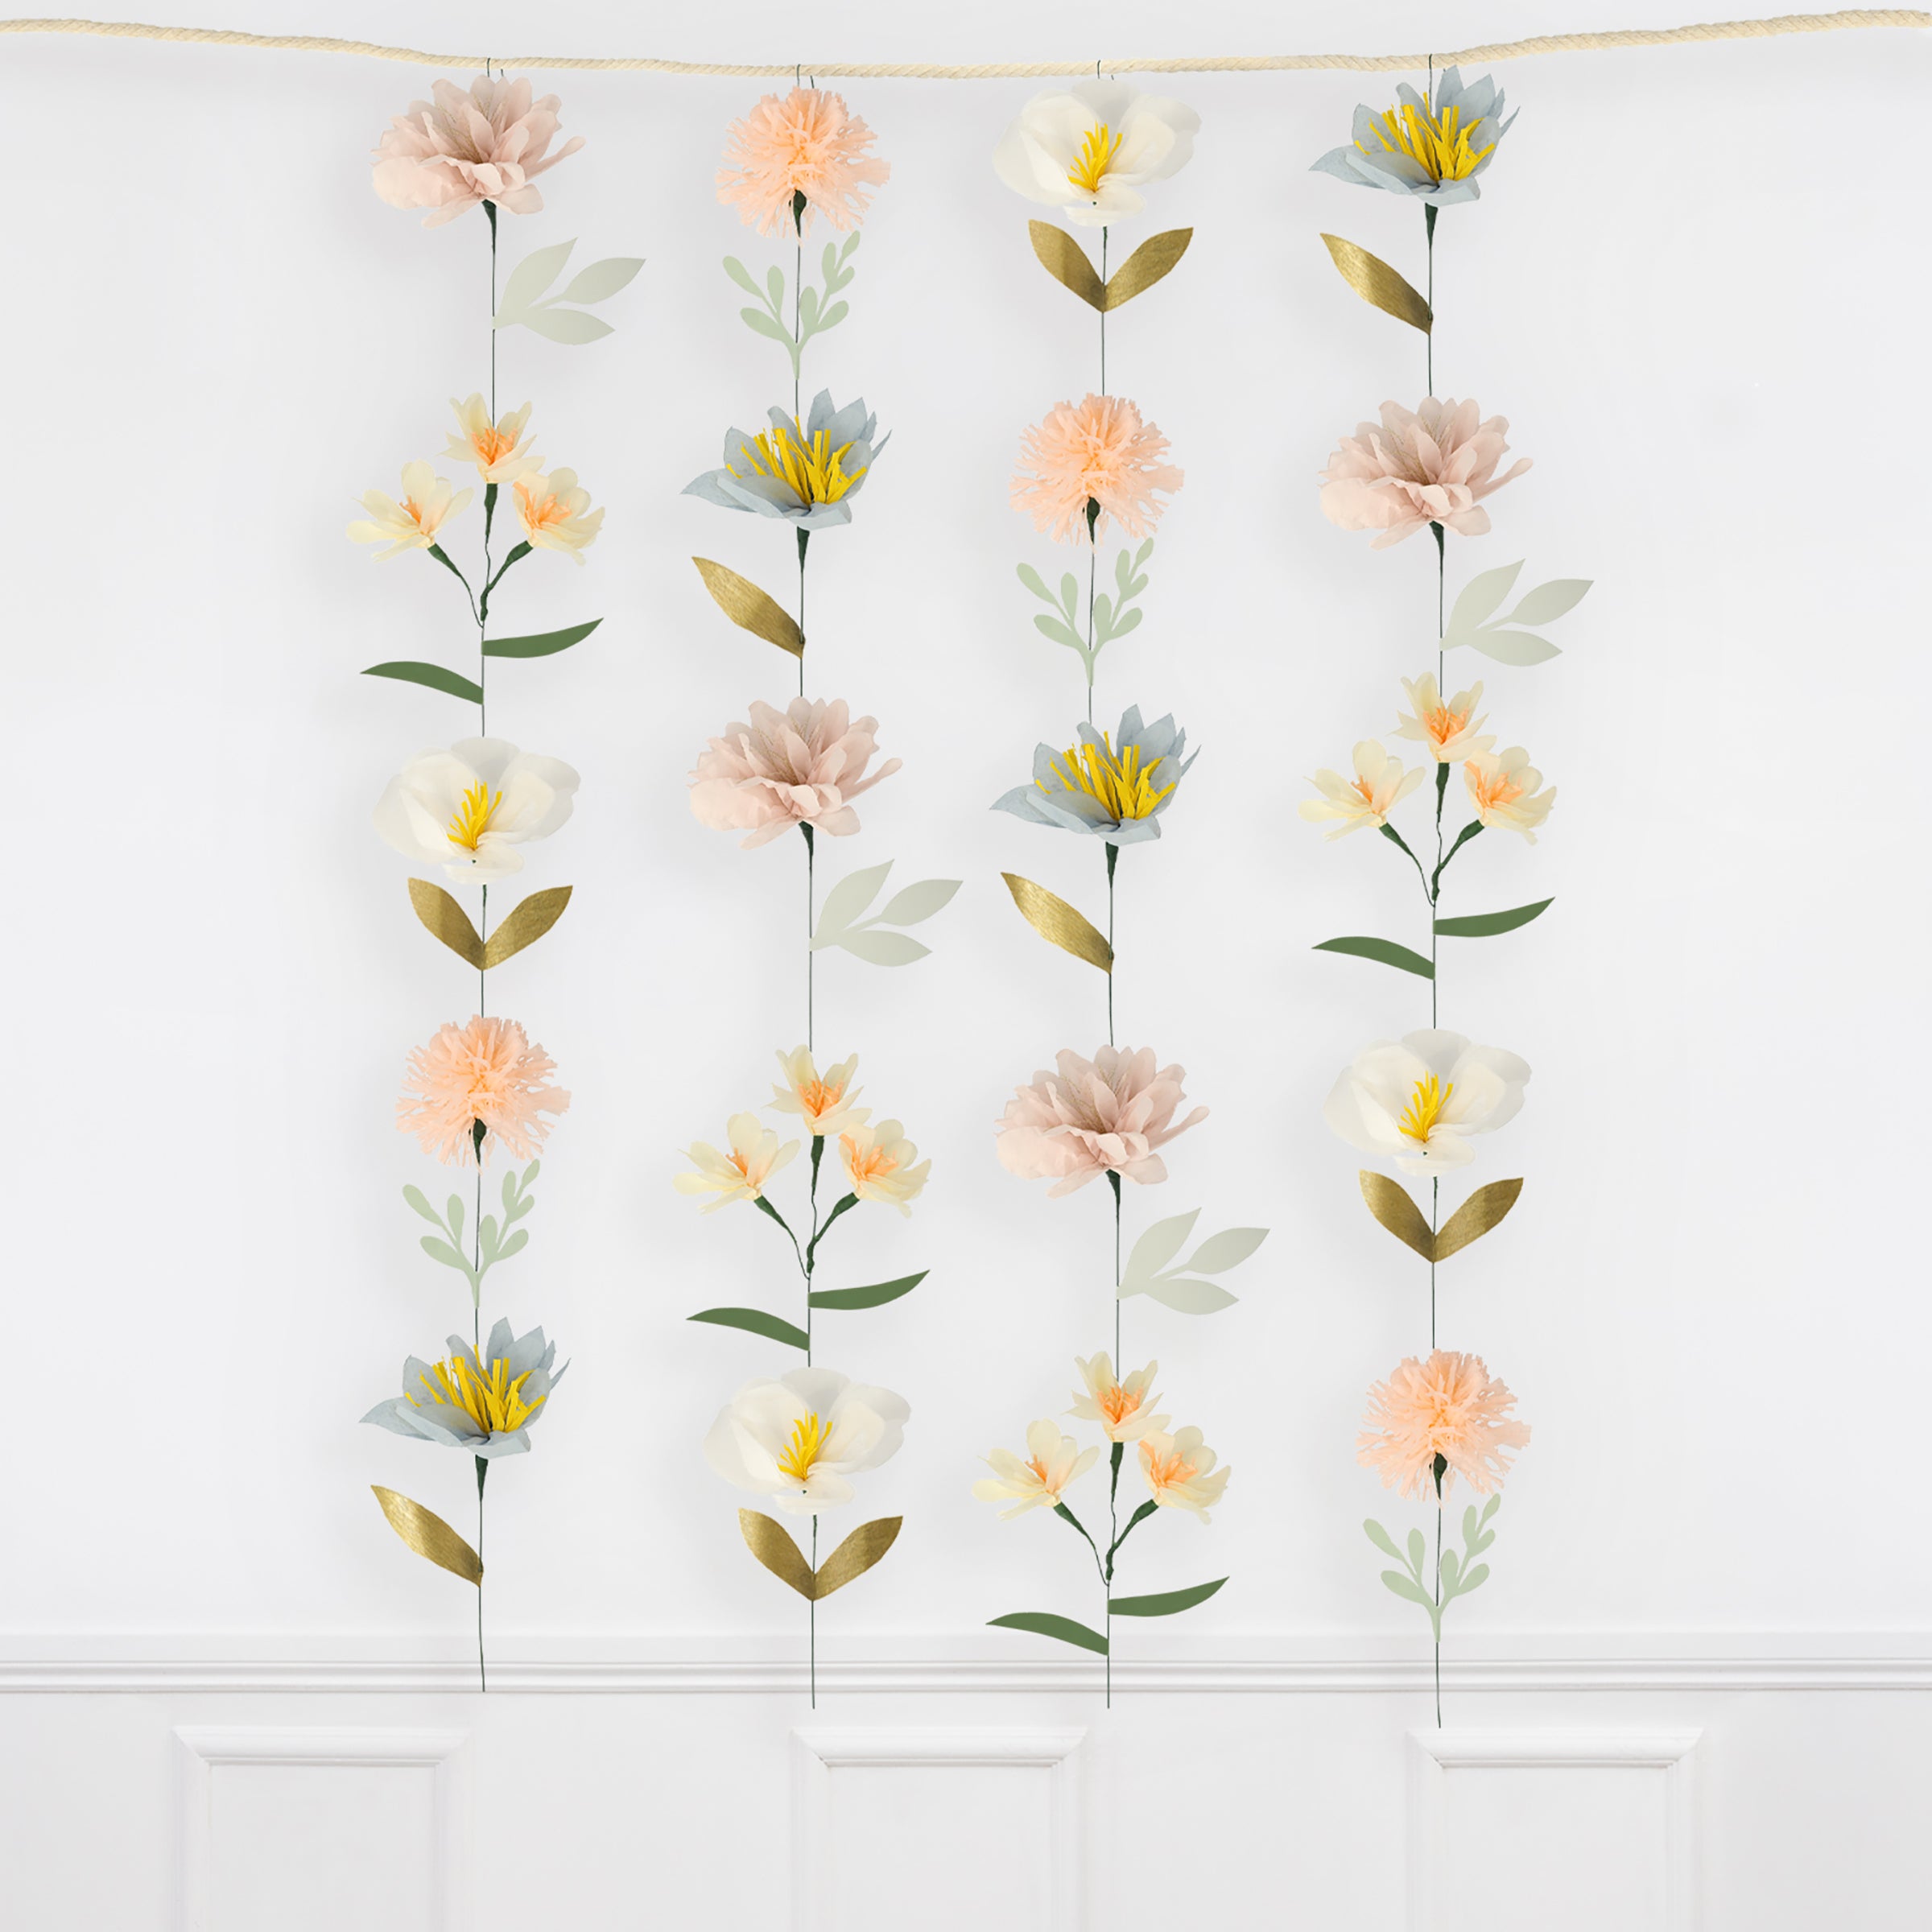 Beautiful tissue paper flowers make an amazing wall decoration.